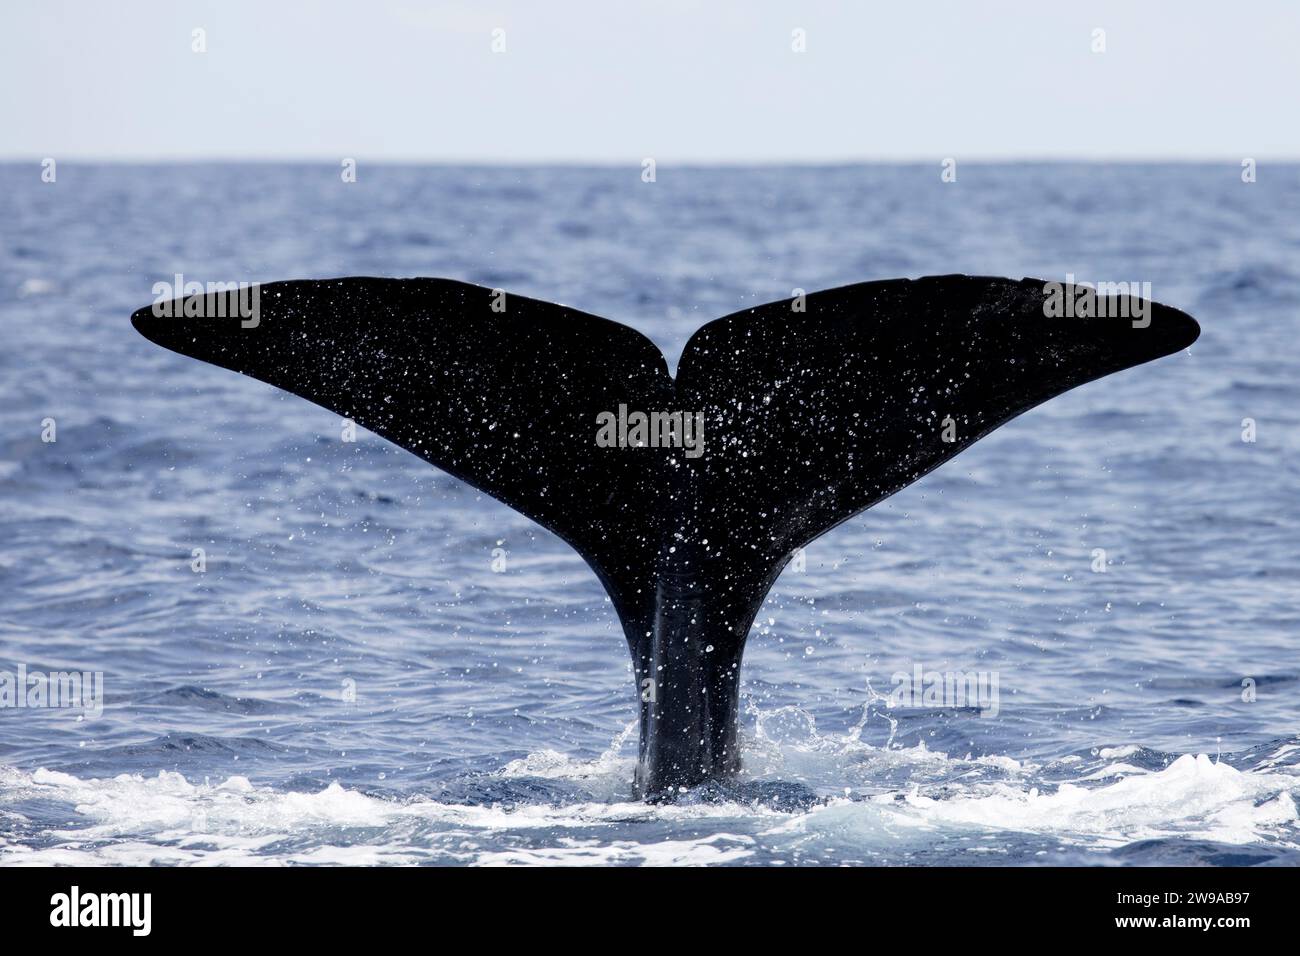 Sperm Whale (Physeter macrocephalus) fluking, Pico of the Azores, Portugal Stock Photo